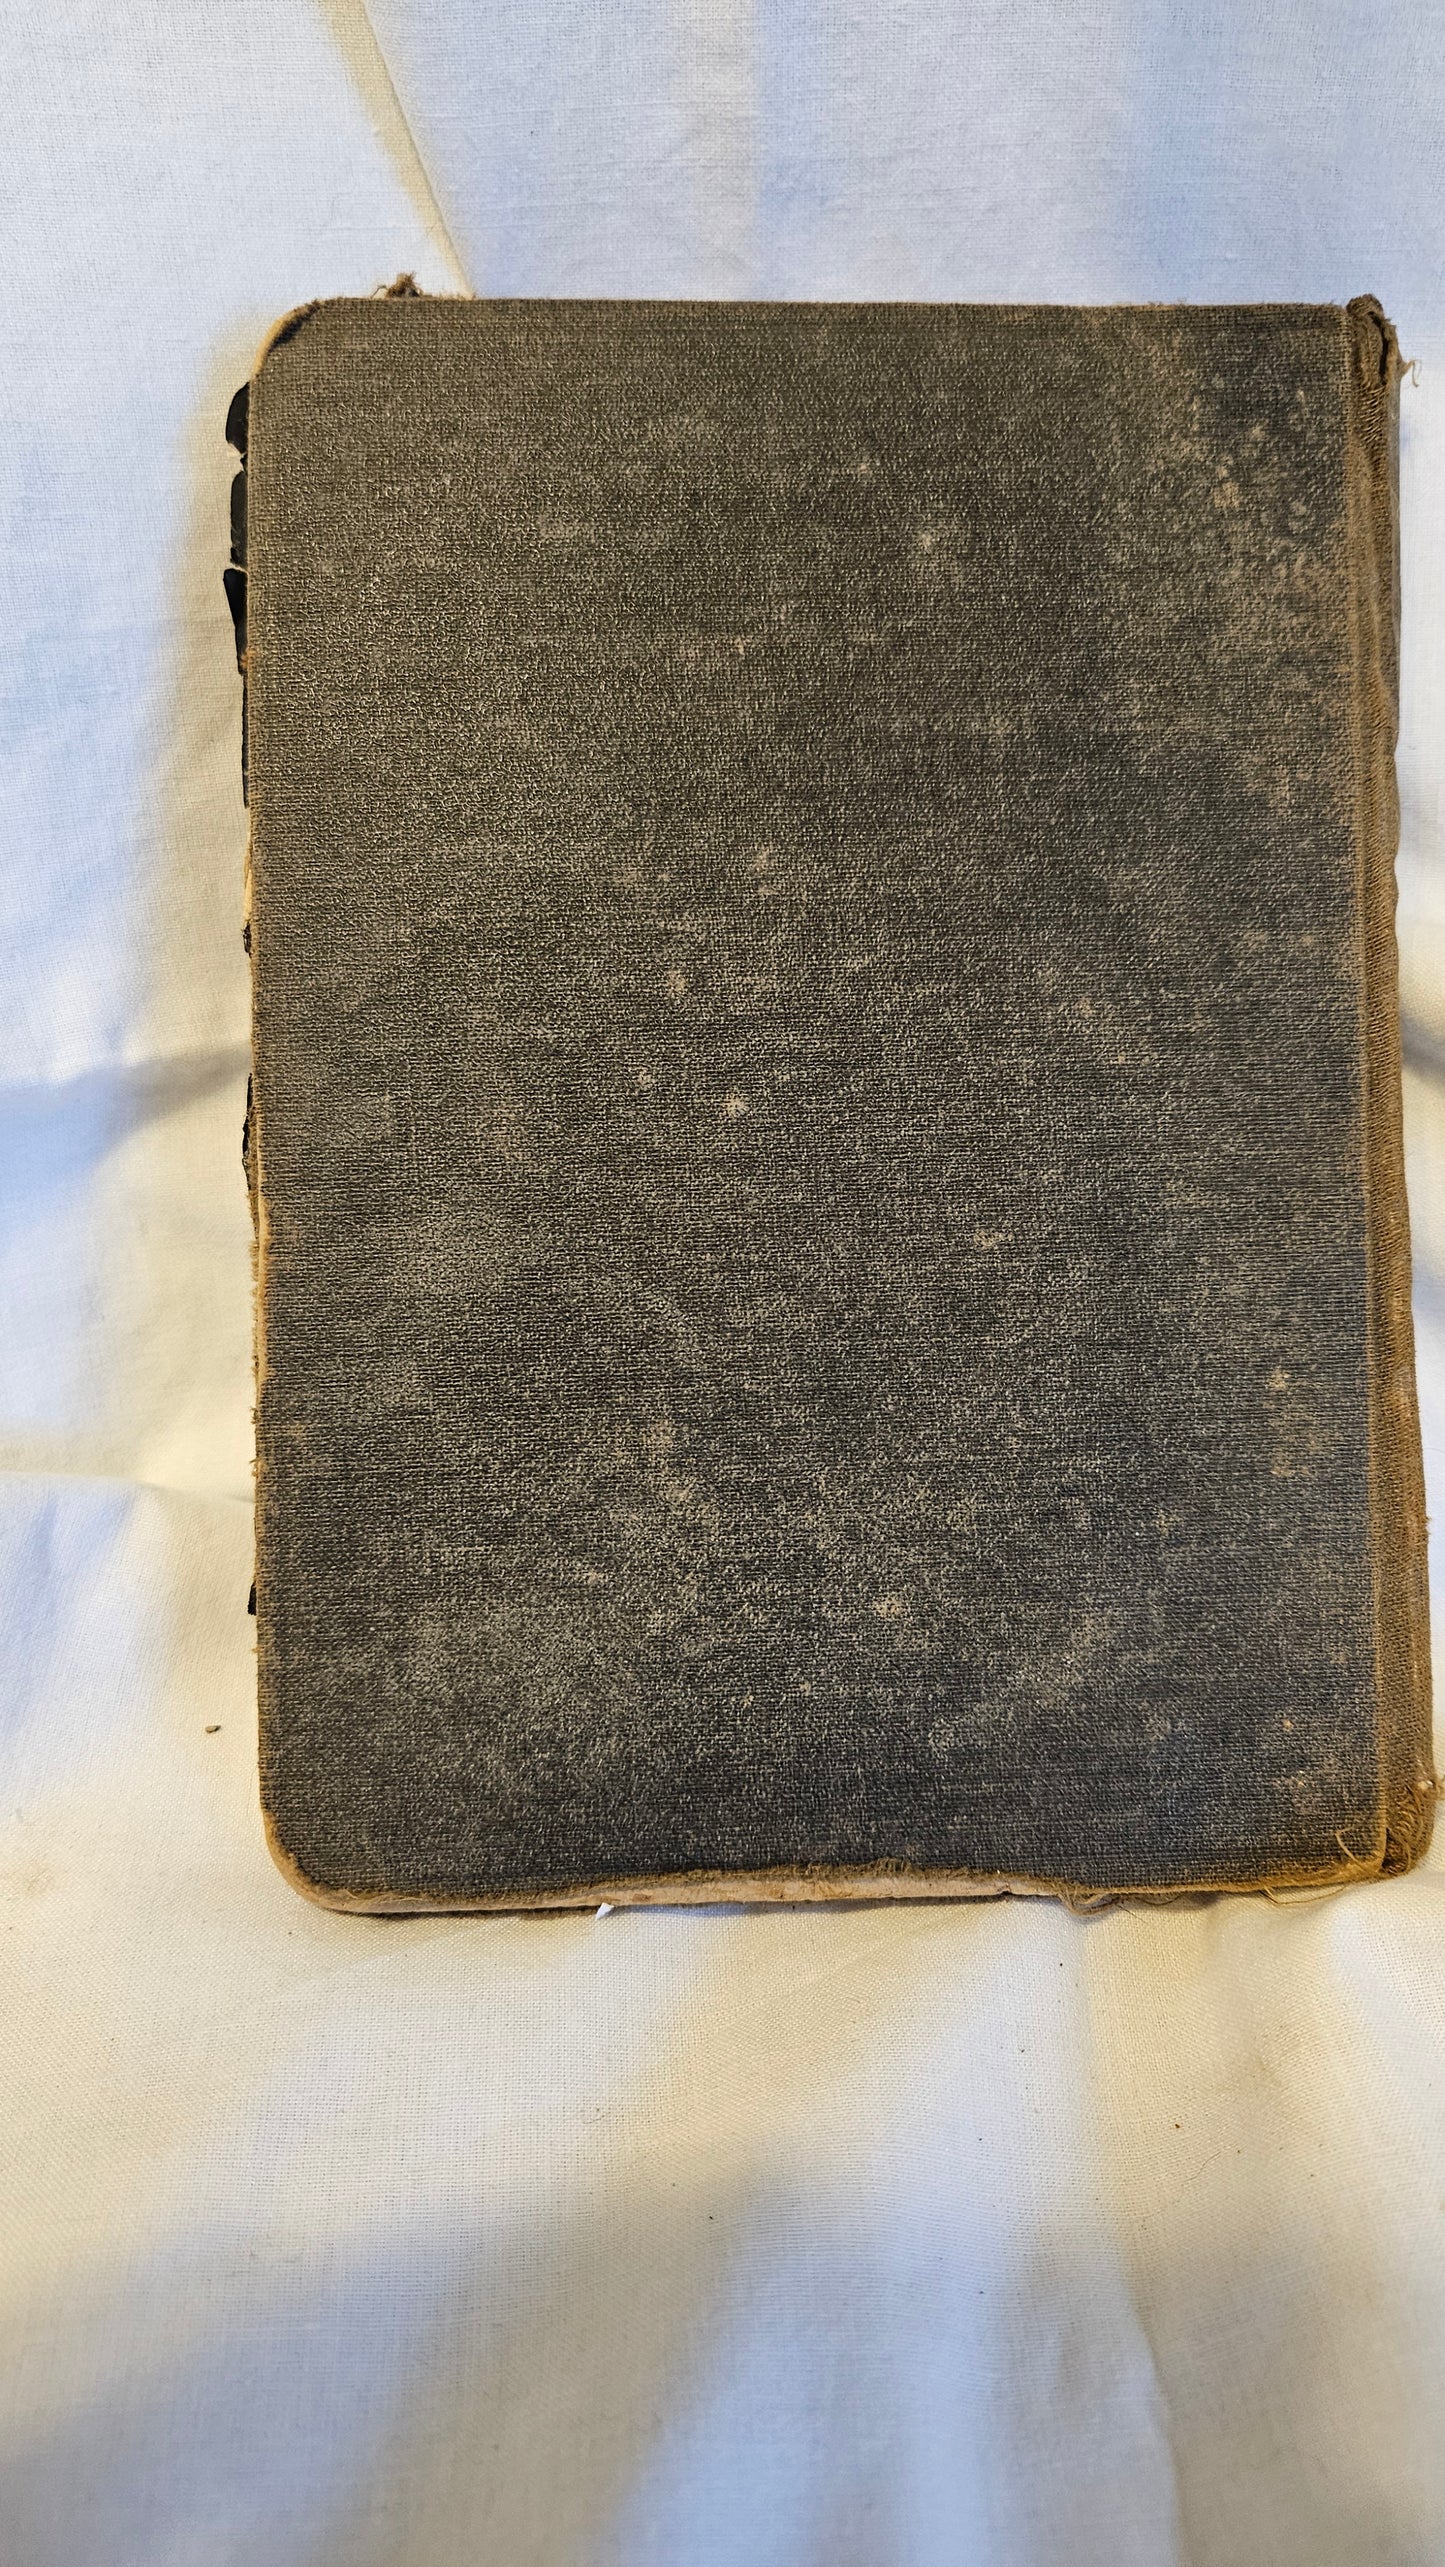 New Testament - early 1900s or older